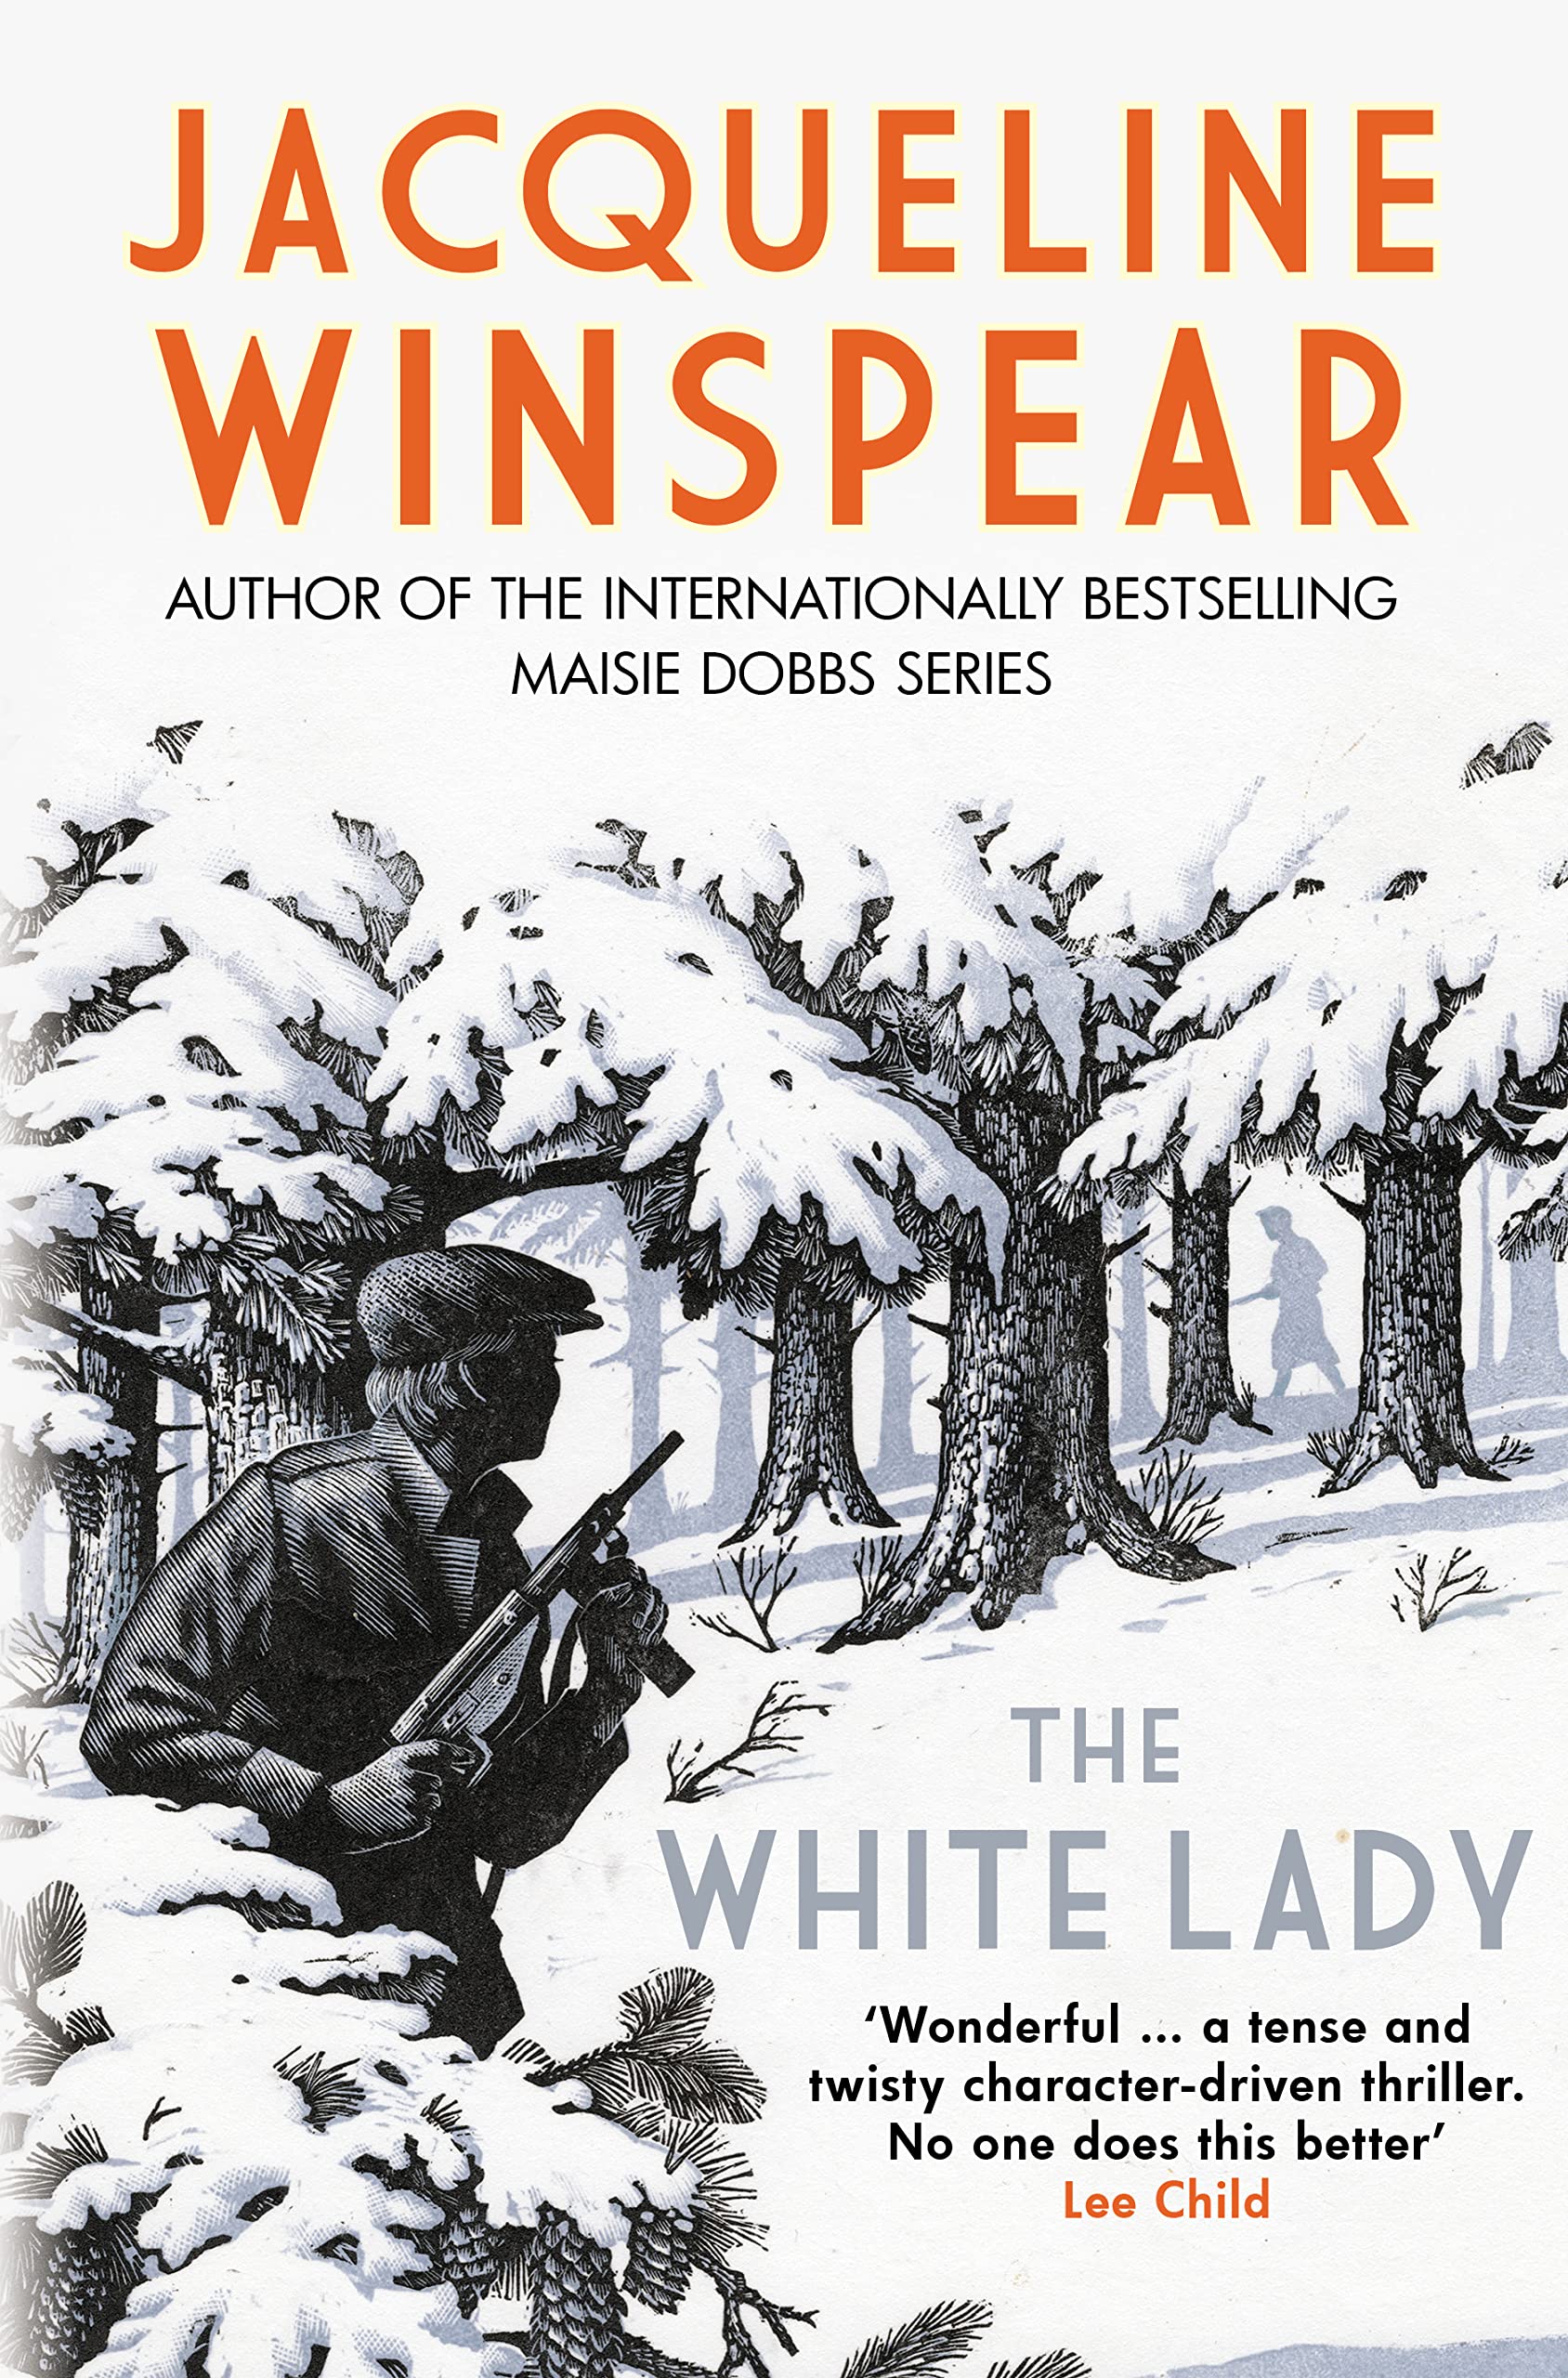 The white lady paperback book cover